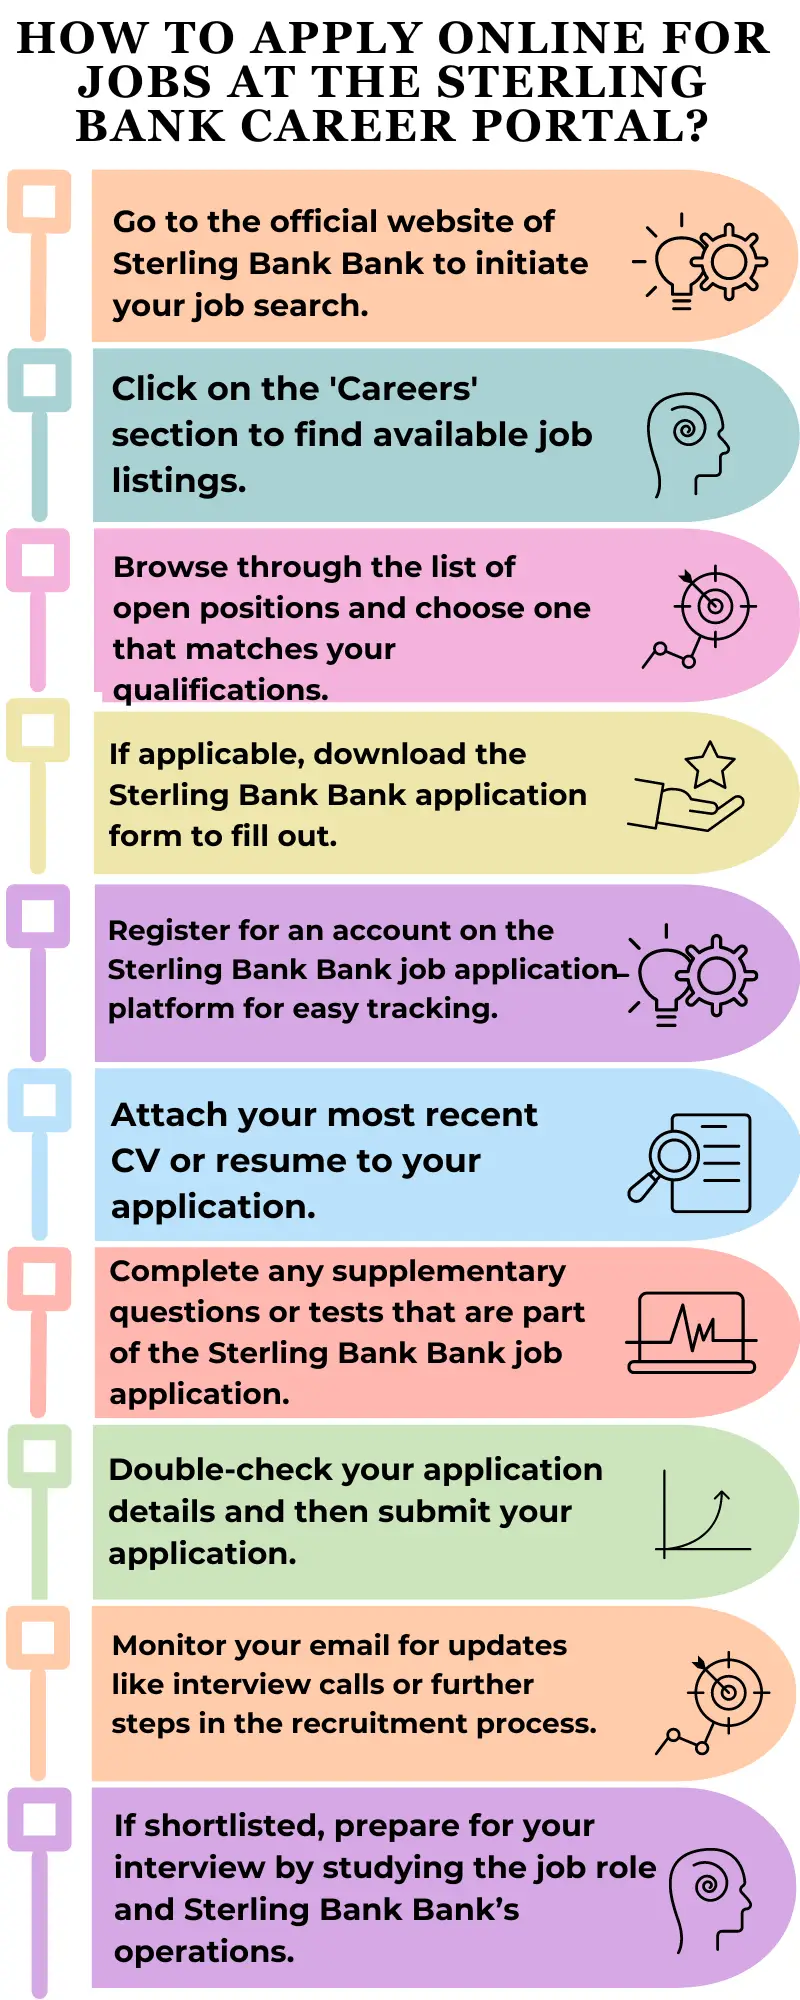 How to Apply Online for Jobs at the Sterling Bank Career Portal?